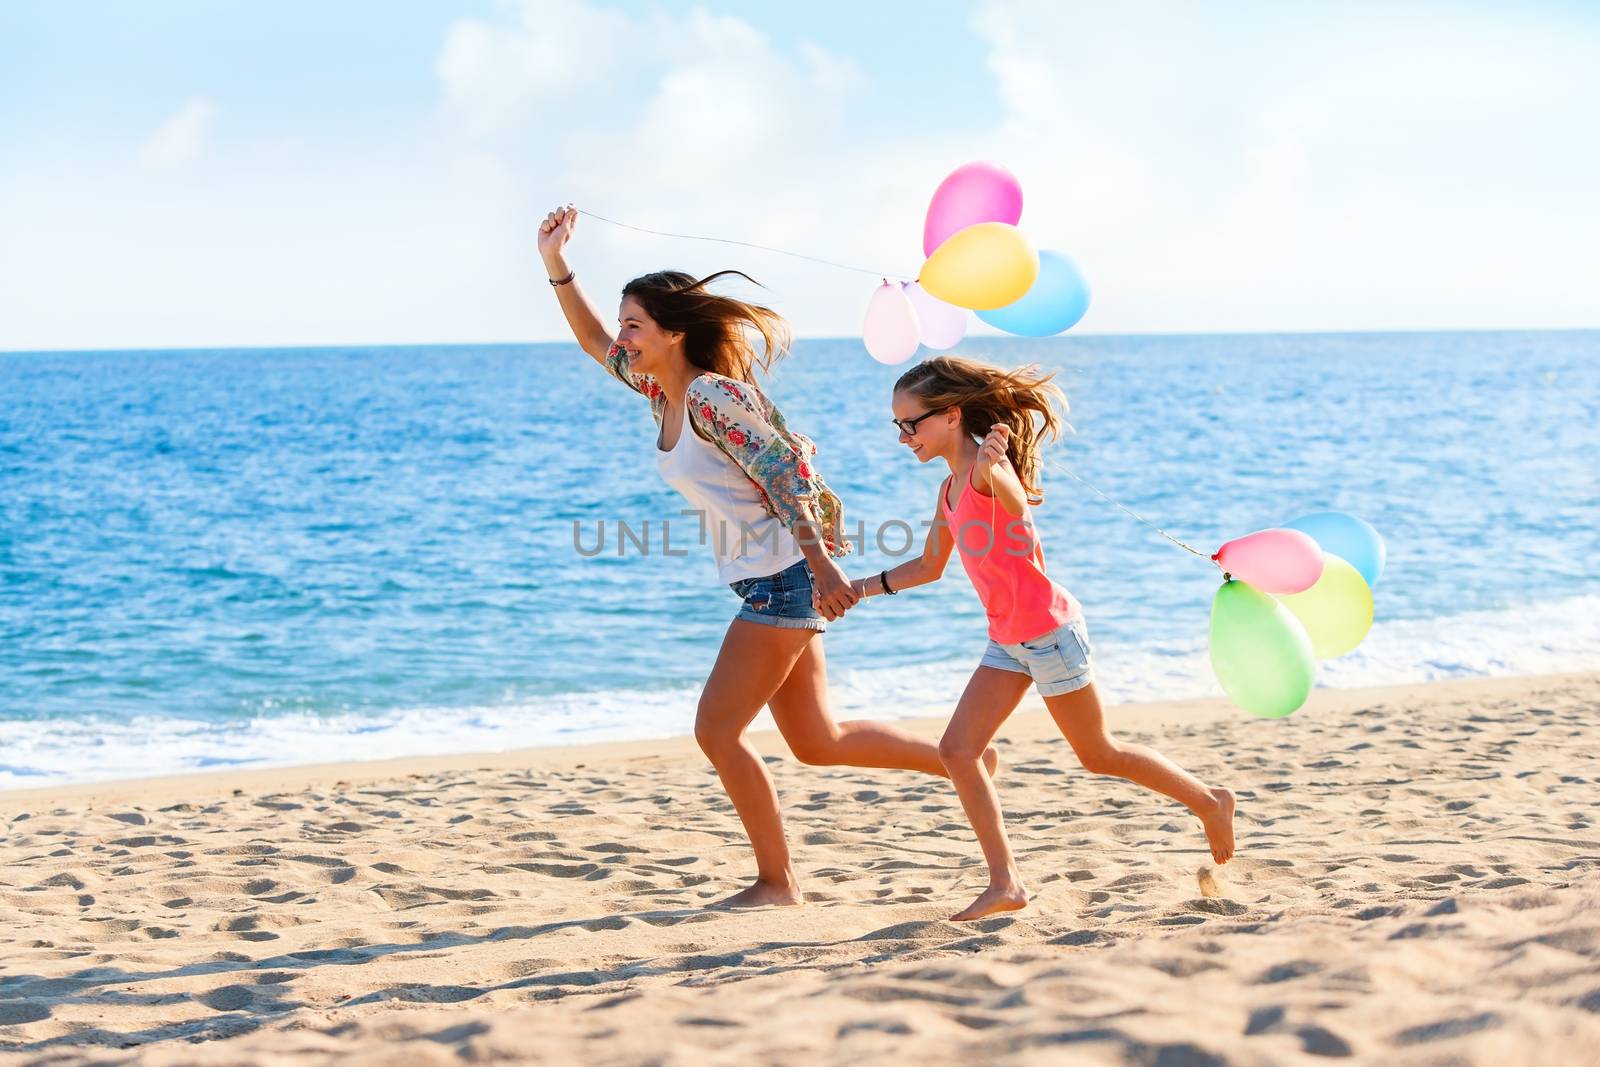 Action portrait of Young girls running with colorful balloons on beach.